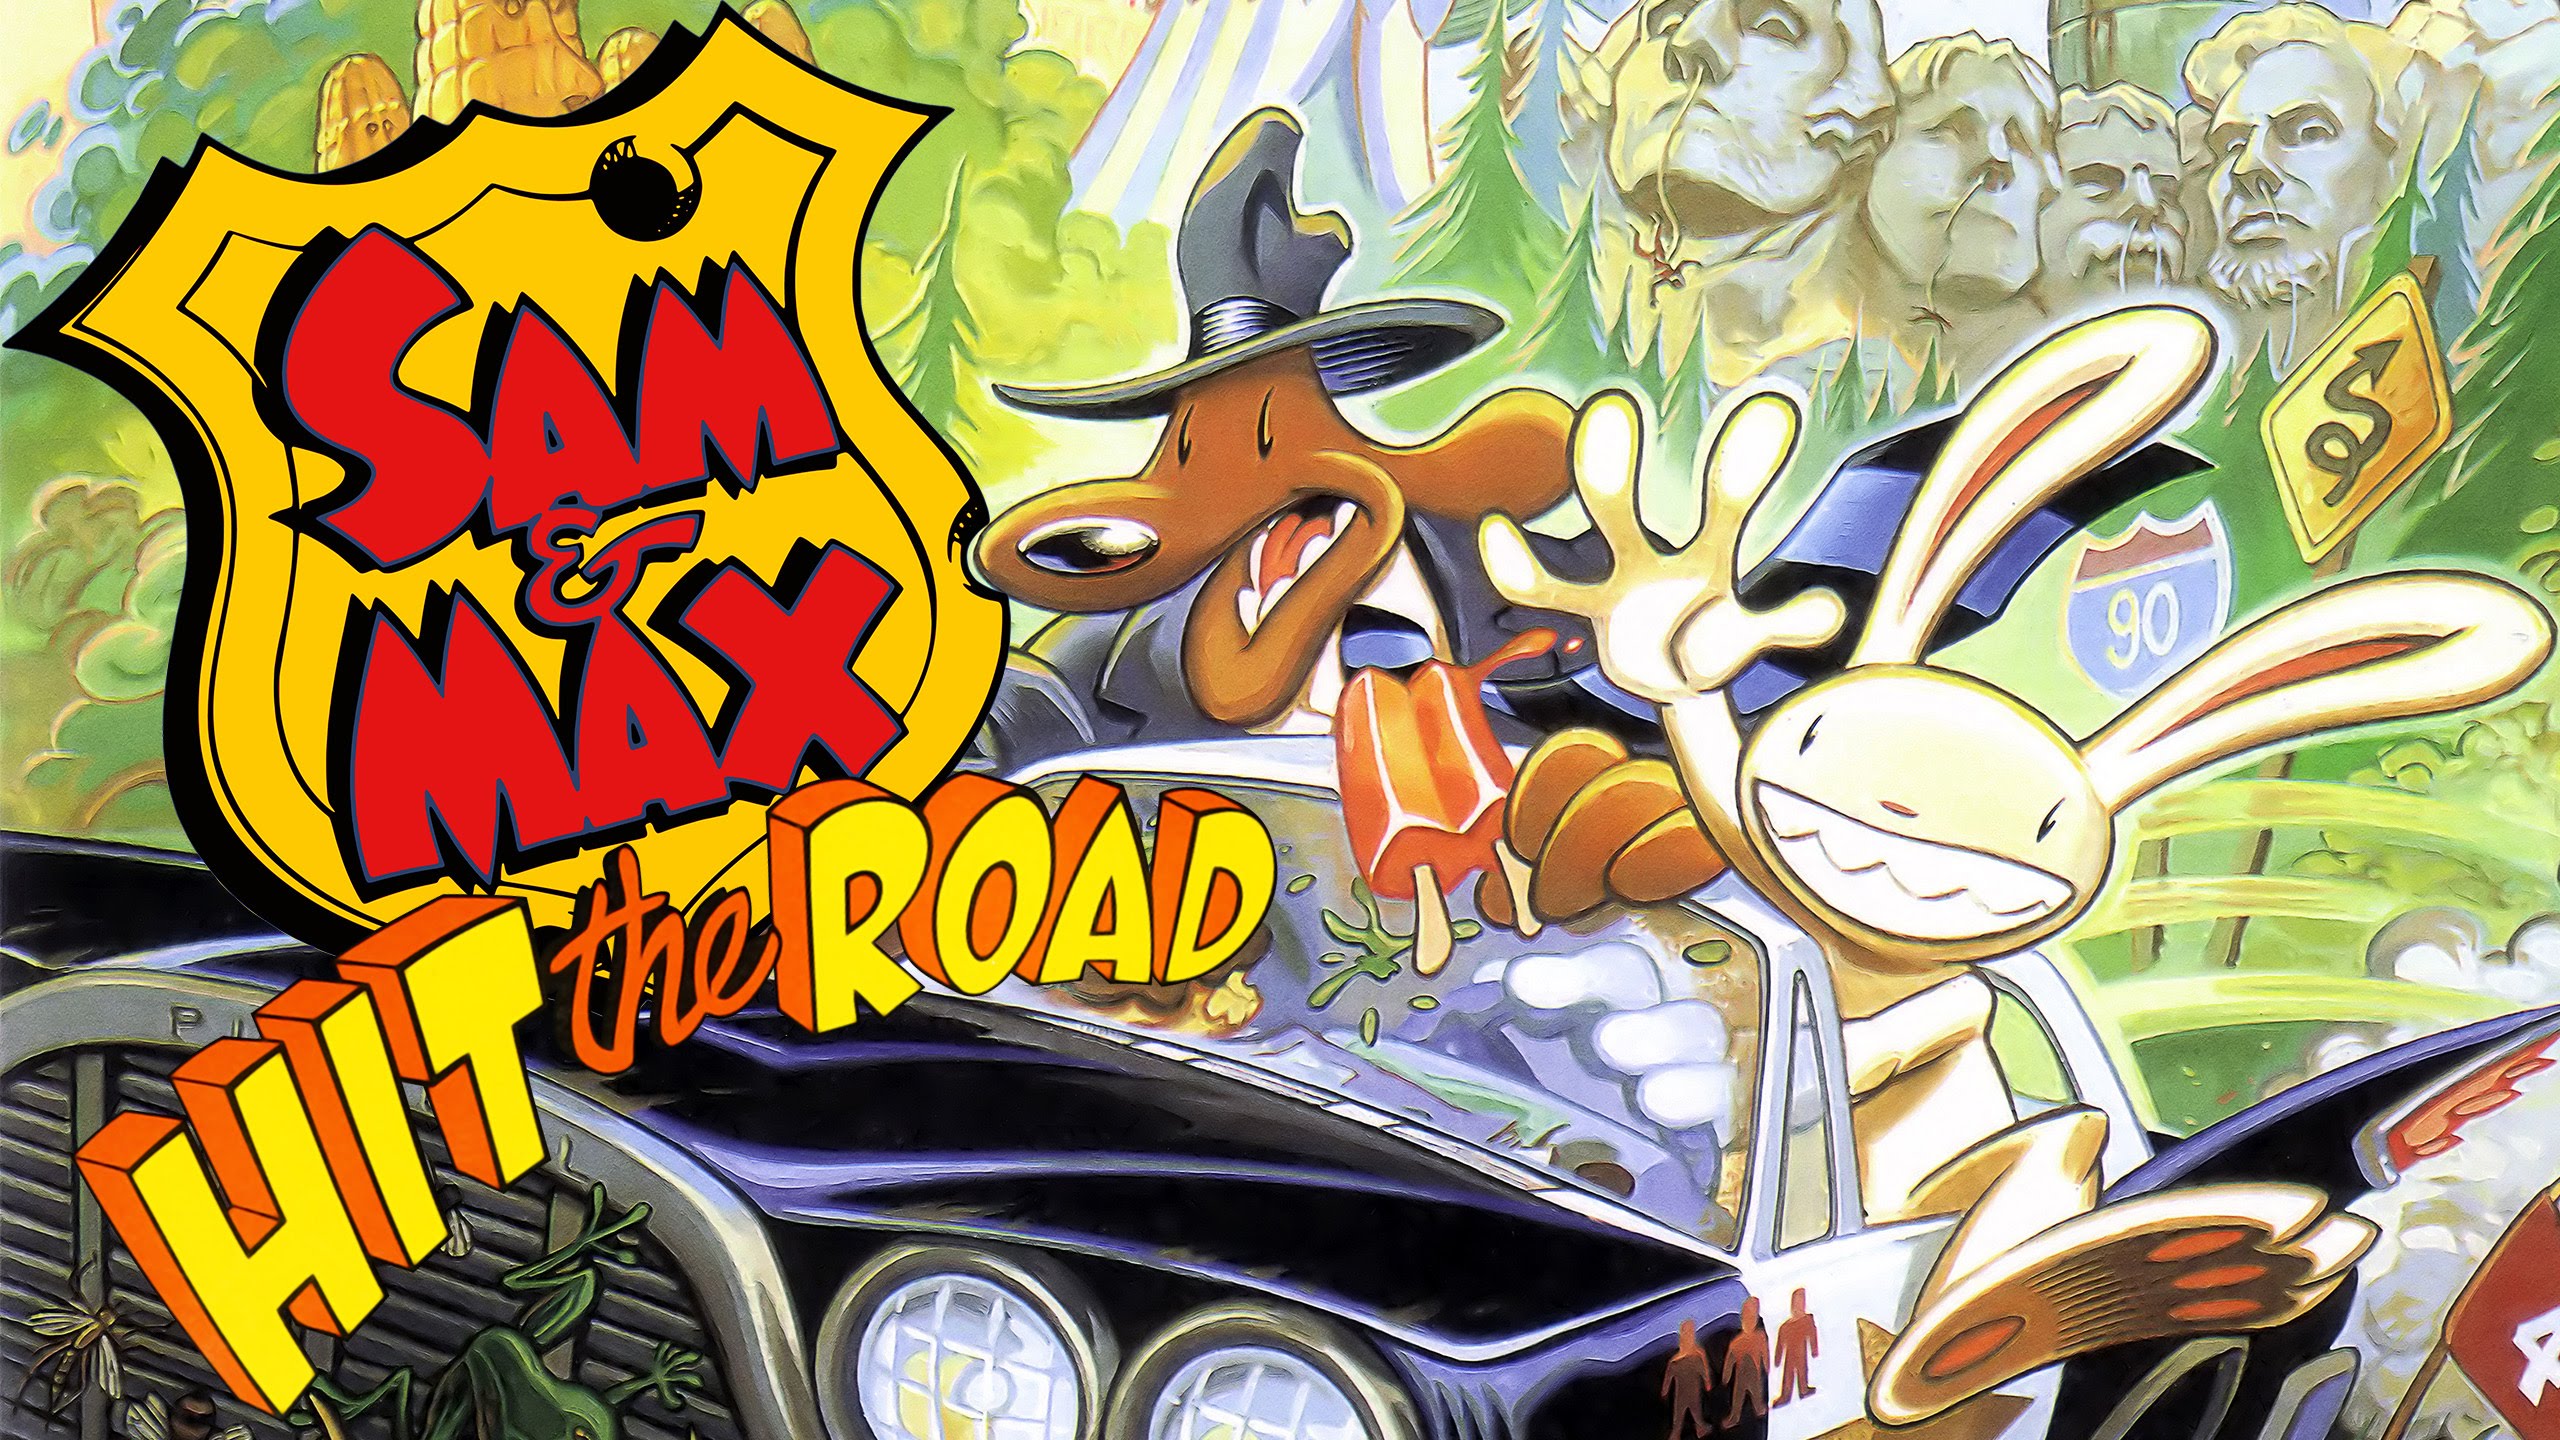 Max of Sam and Max Wallpaper by bdell on DeviantArt